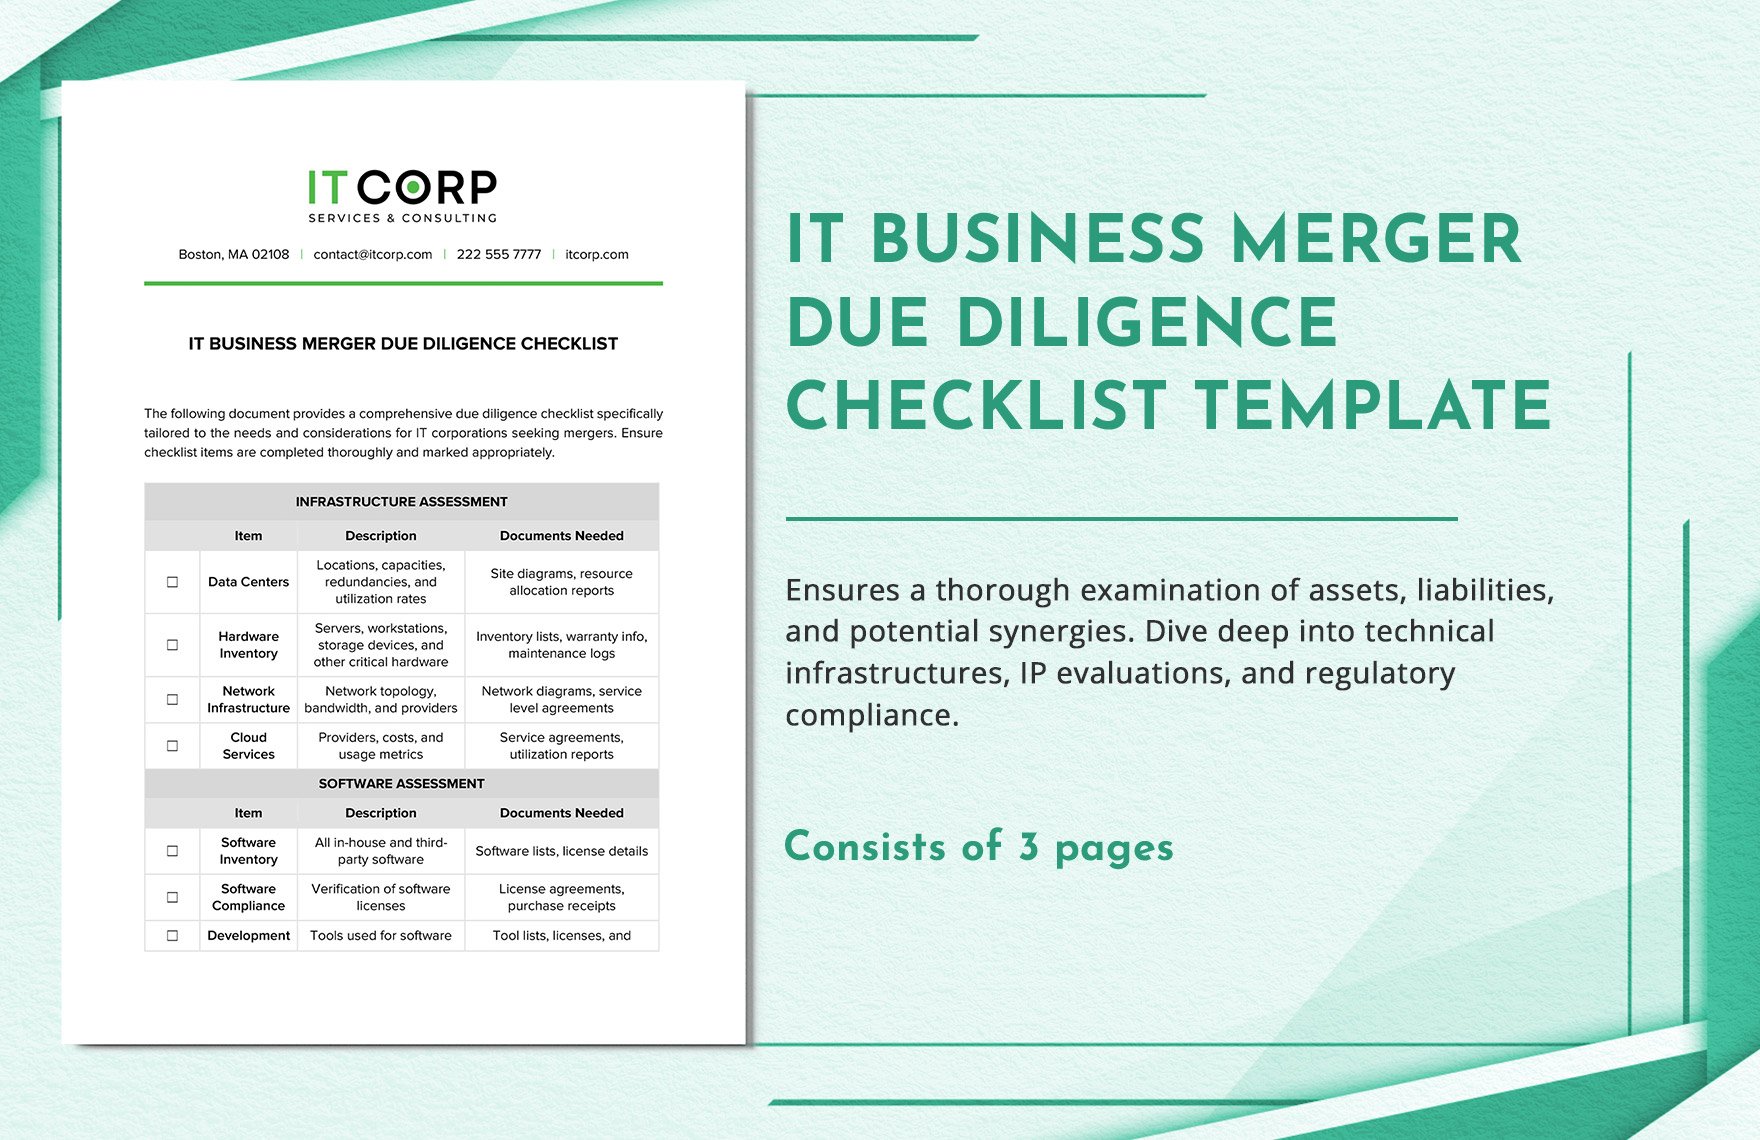 IT Business Merger Due Diligence Checklist Template